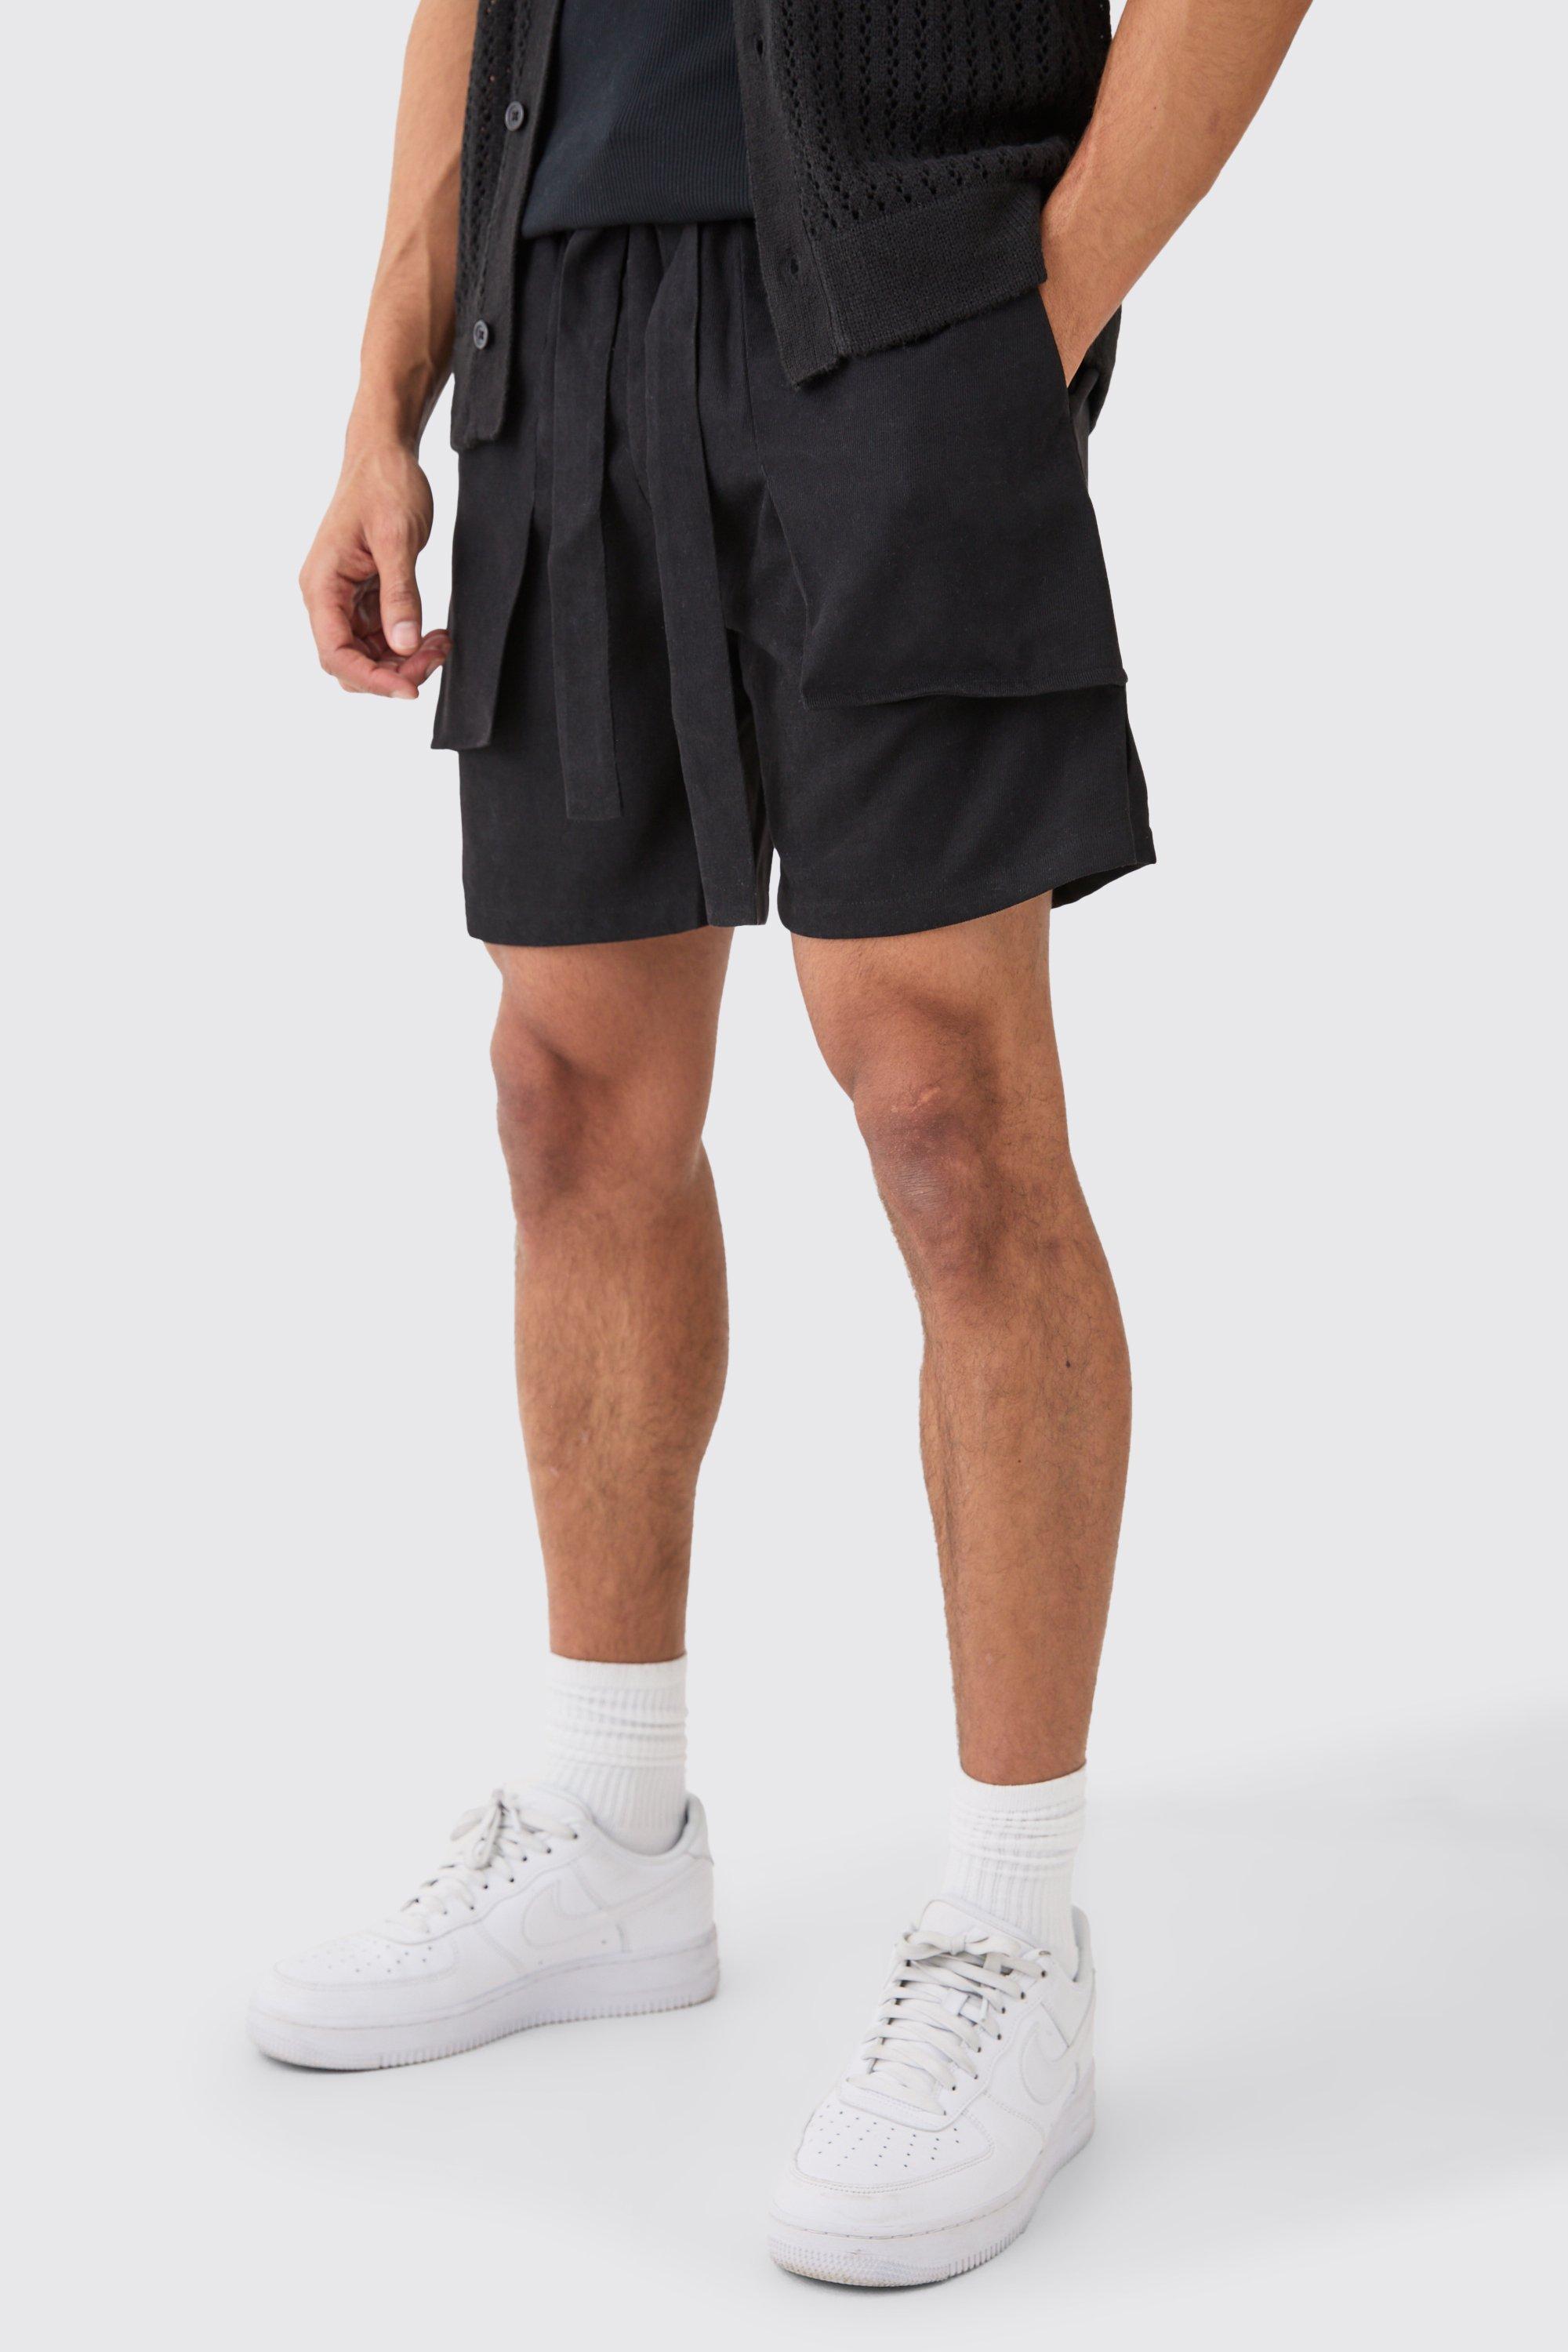 Mens Black Elastic Waist Peached Relaxed Fit Short, Black